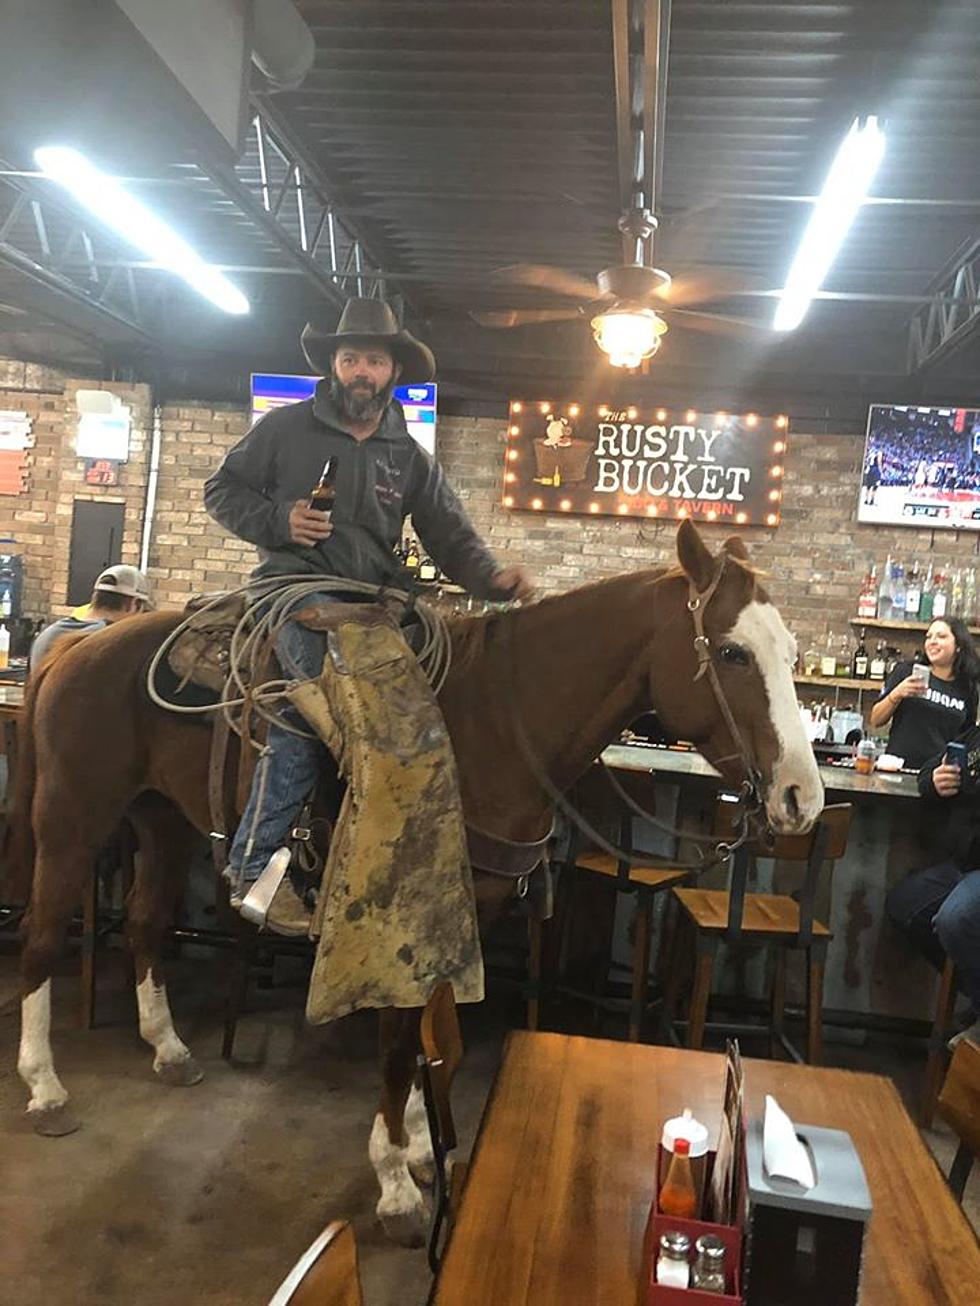 Man Rides Horse Into The Rusty Bucket In Midland